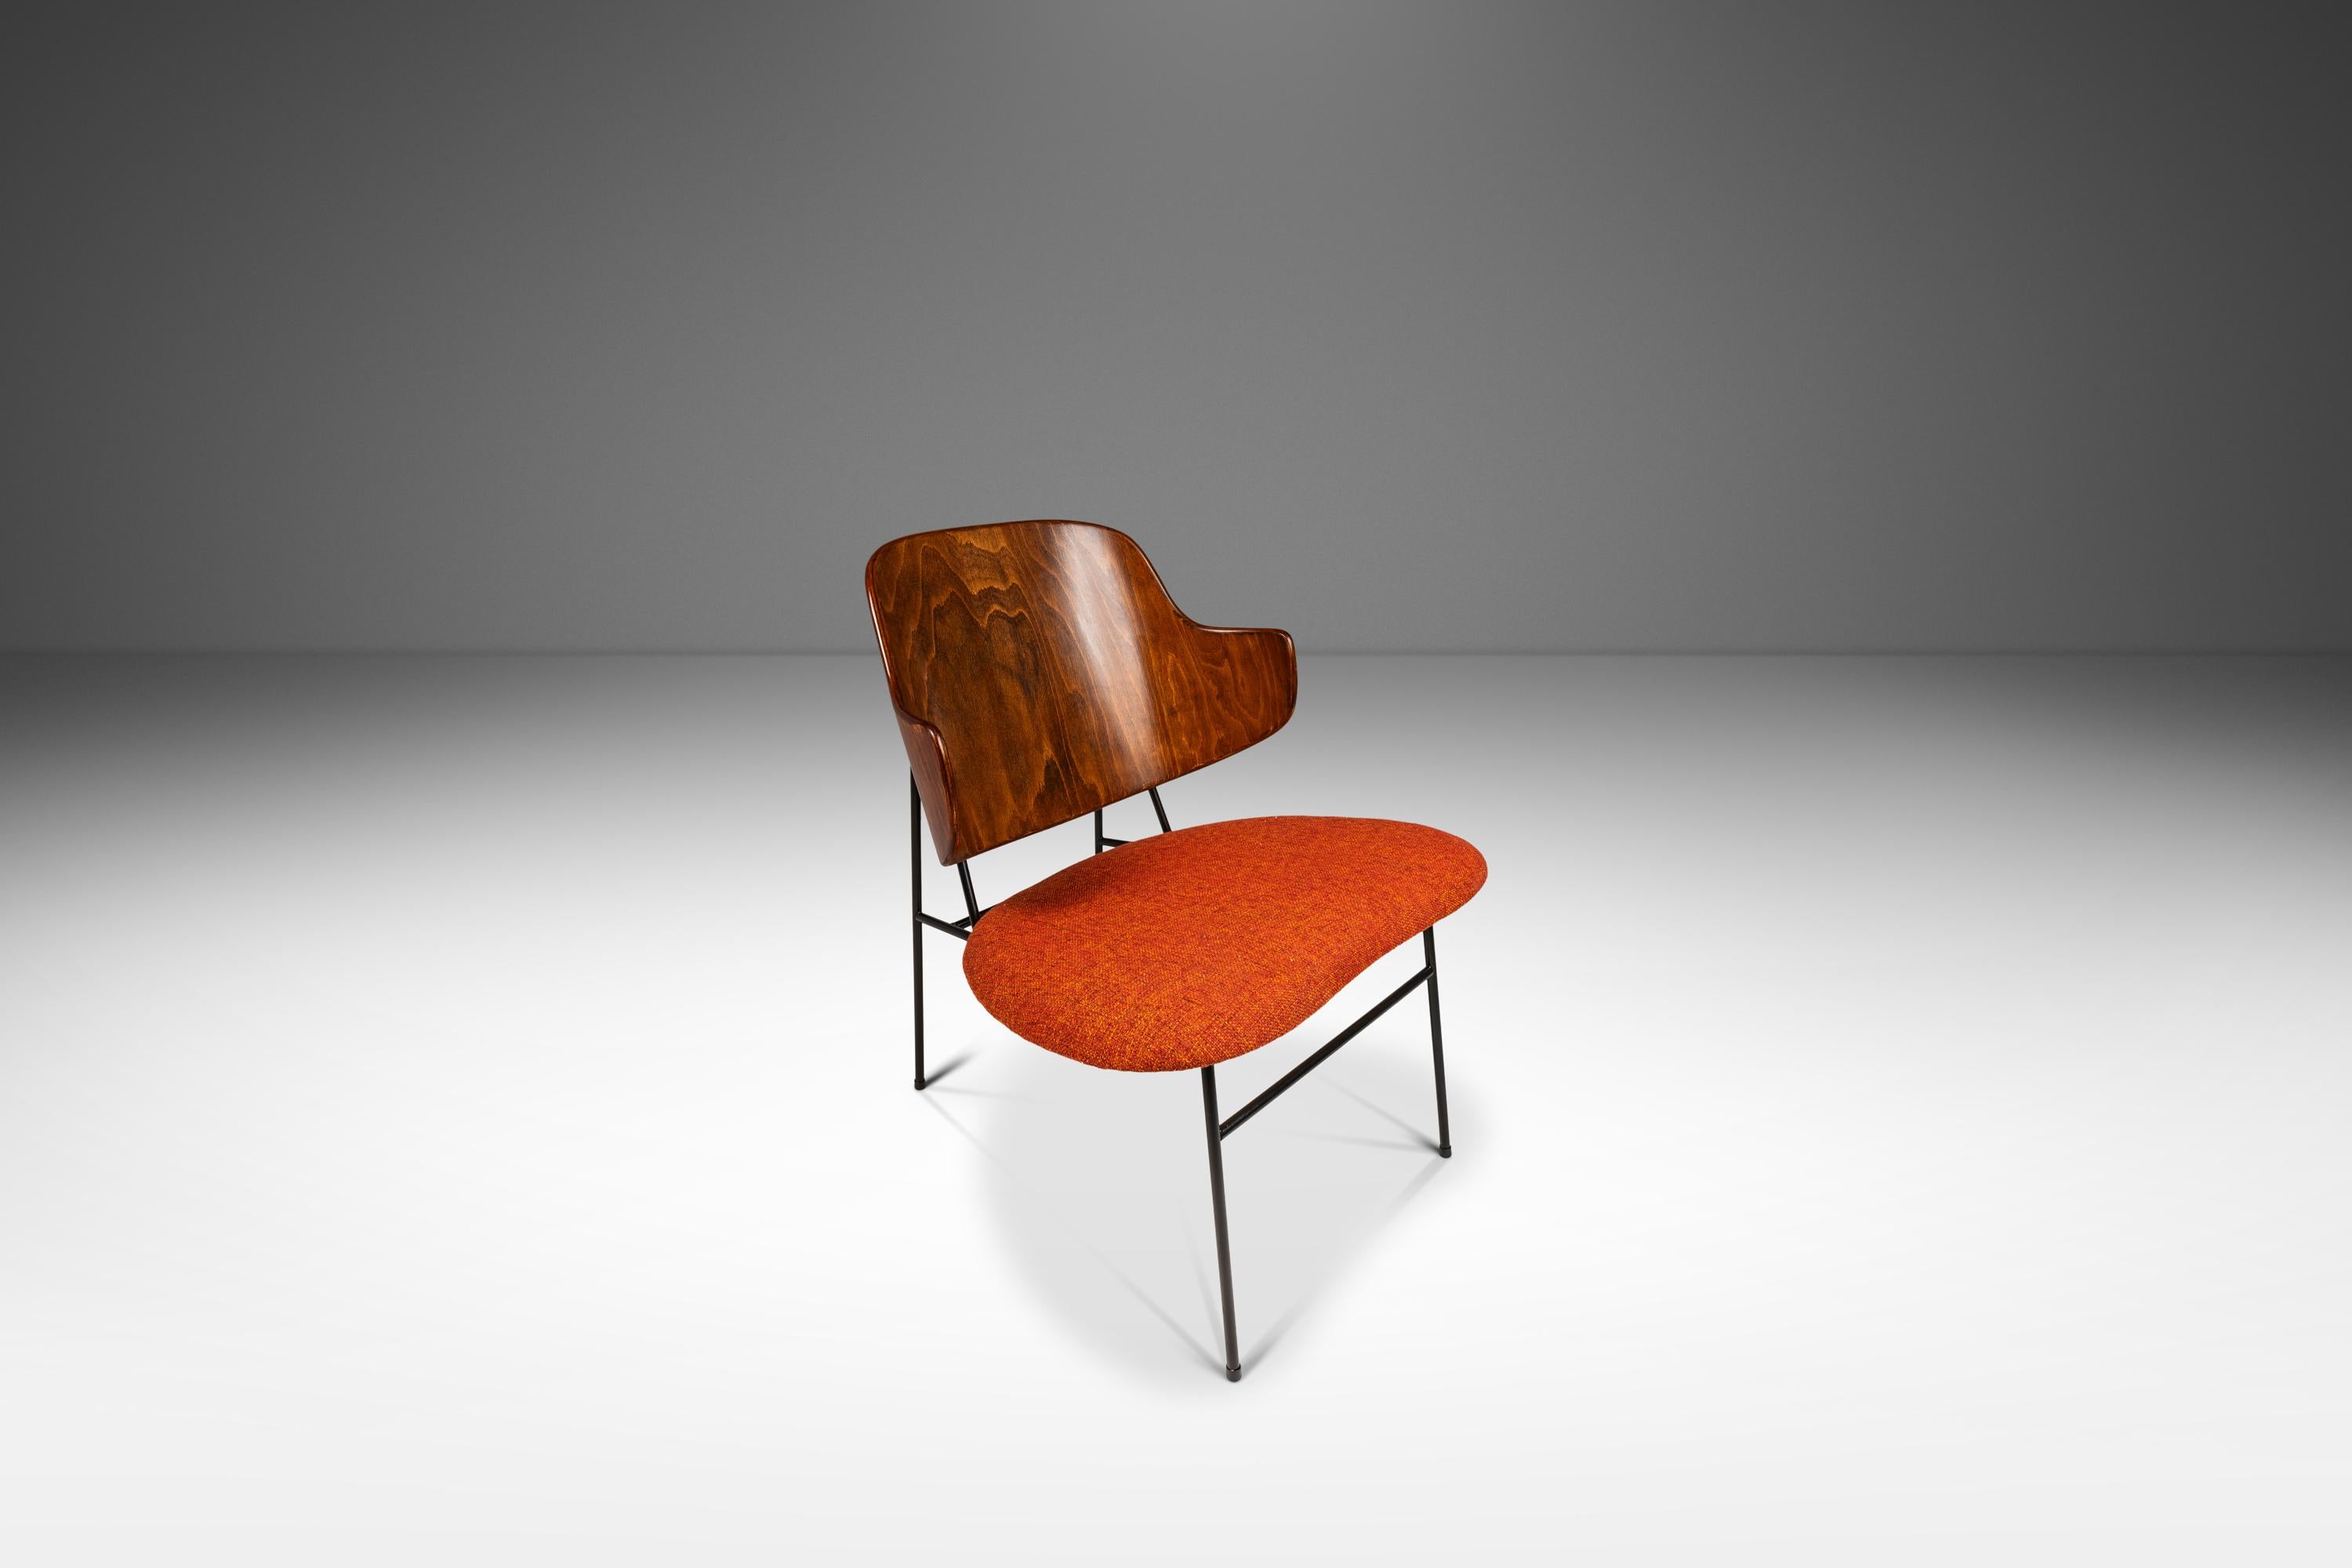 Introducing a rare set of authentic 'Penguin' chairs designed by Ib Kofod-Larsen for Selig.  First produced by Selig in 1953 these now iconic Danish Modern chairs are the epitome of Danish Modern Design. Featuring a plywood molded back, a thin metal